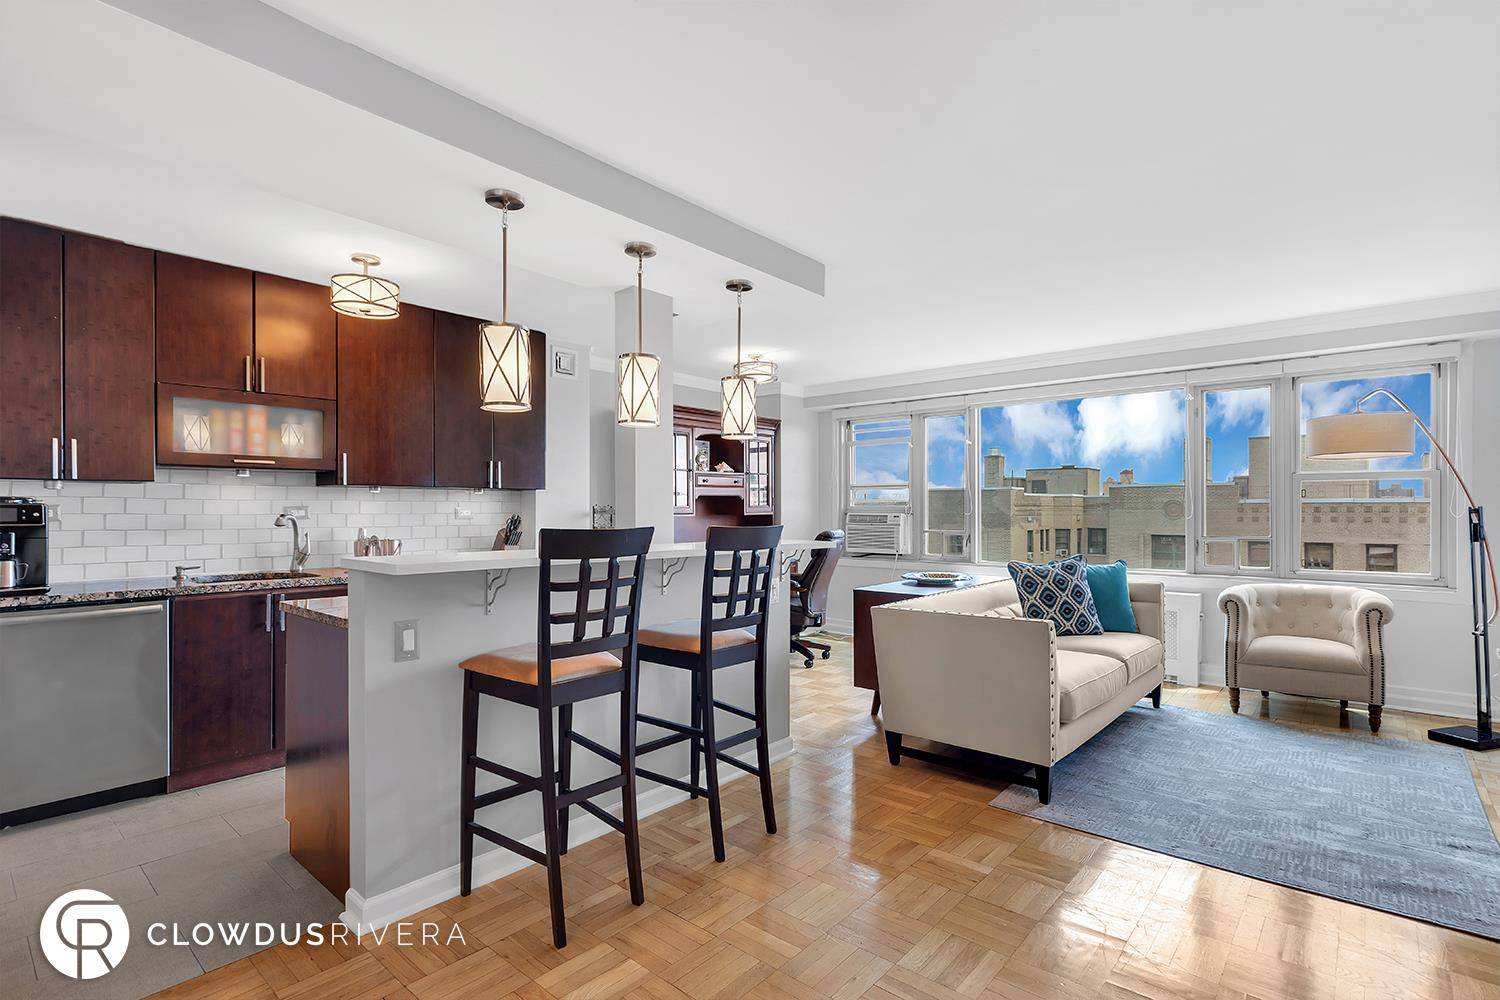 ONE OF THE BEST LAYOUTS IN HUDSON HEIGHTSCabrini Terrace 900 West 190th Street, Apt 7DKindly note that all open houses and showings are by appointment only and this unit is ...